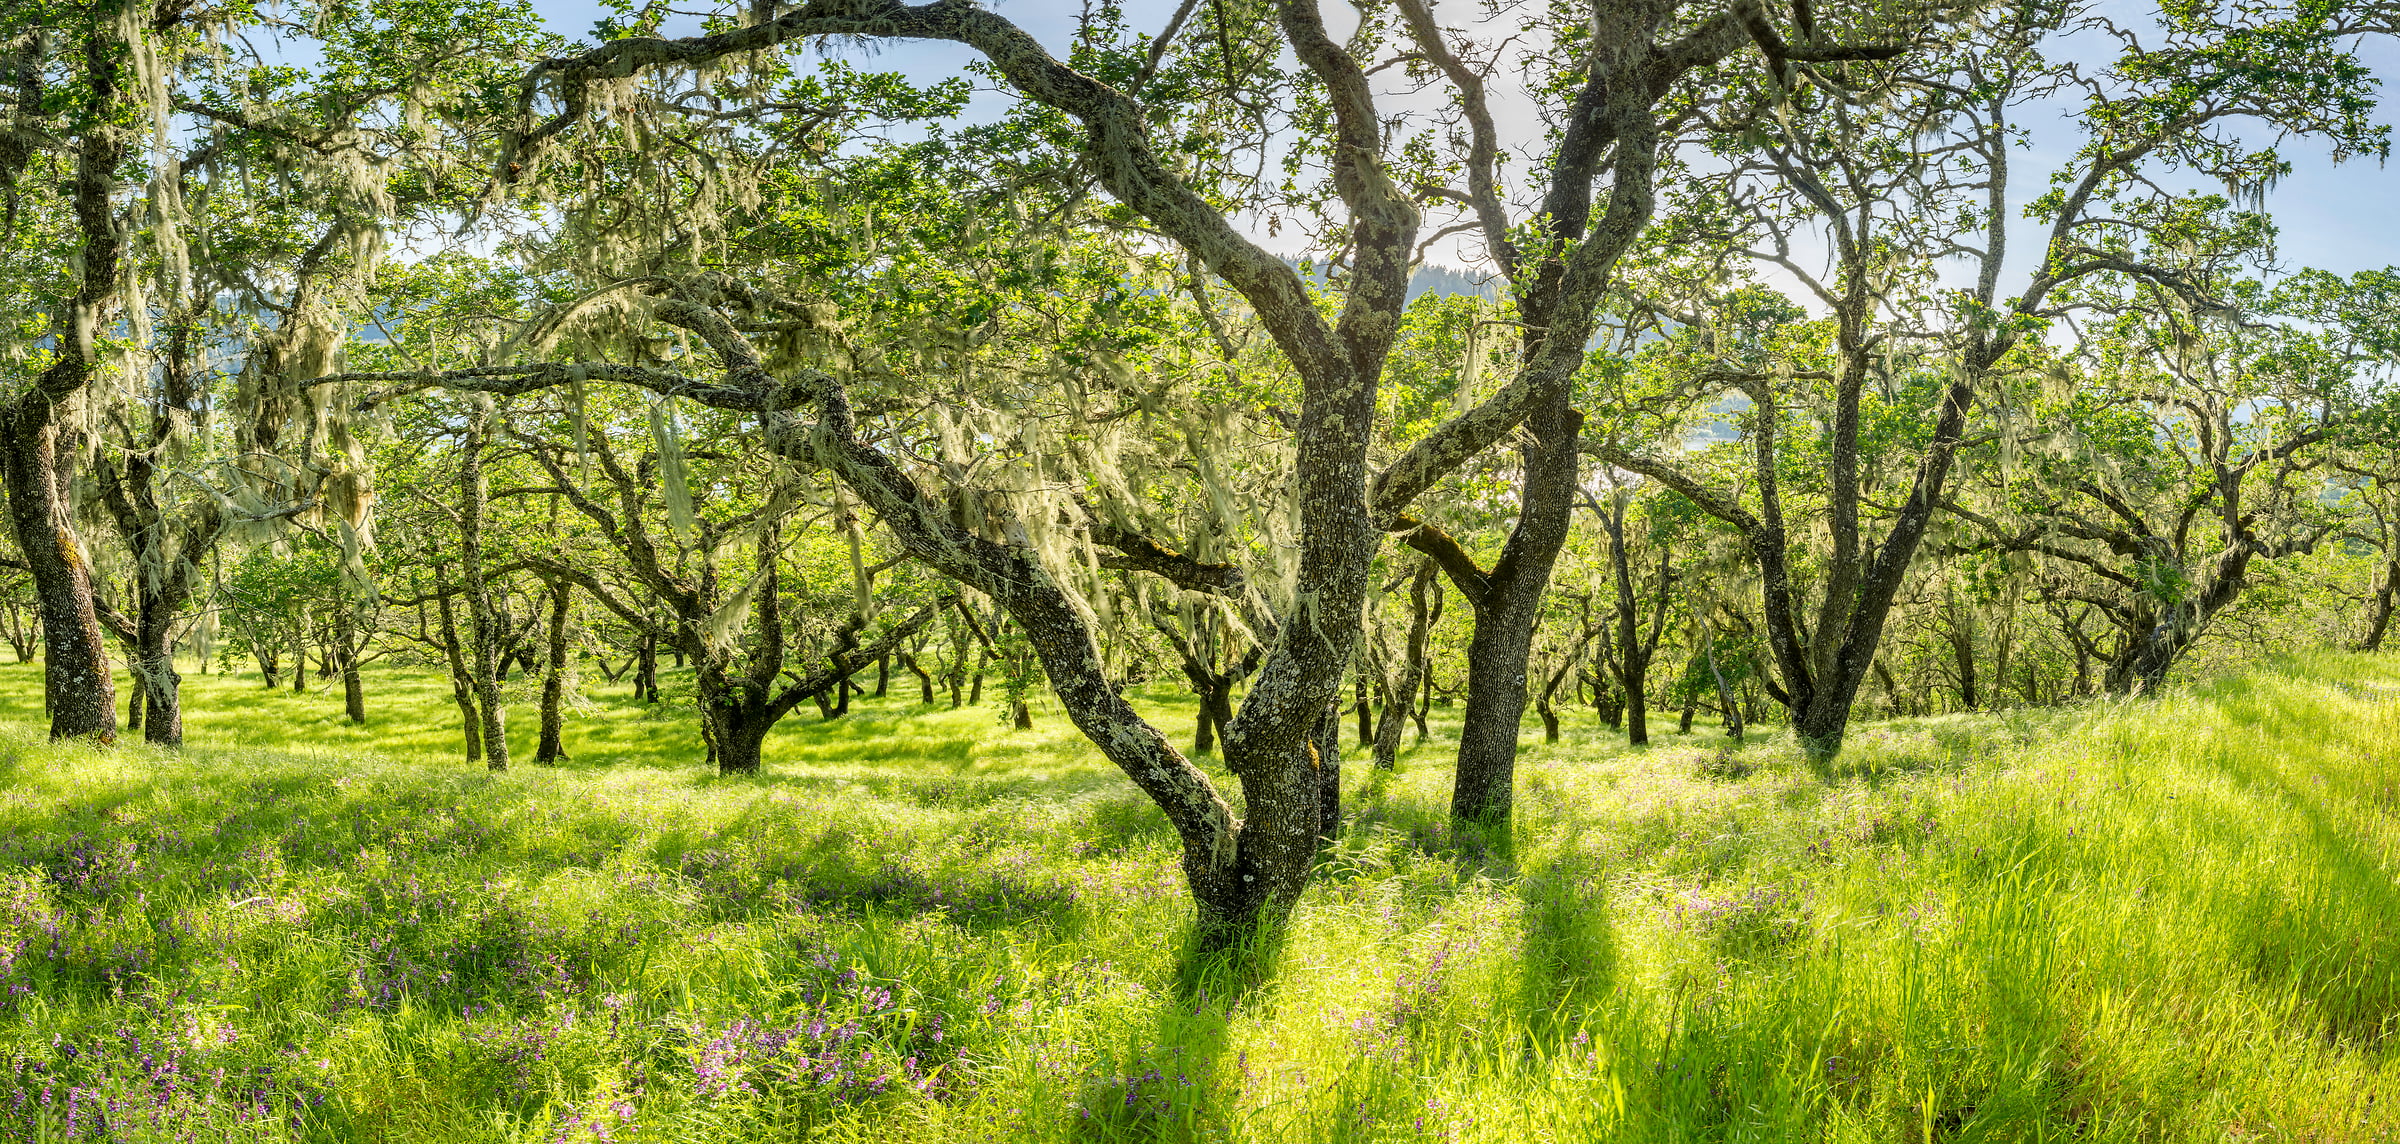 403 megapixels! A very high resolution, large-format VAST photo print of trees in Napa Valley; fine art nature photo created by Justin Katz in Lake Hennessey, Napa Valley, California